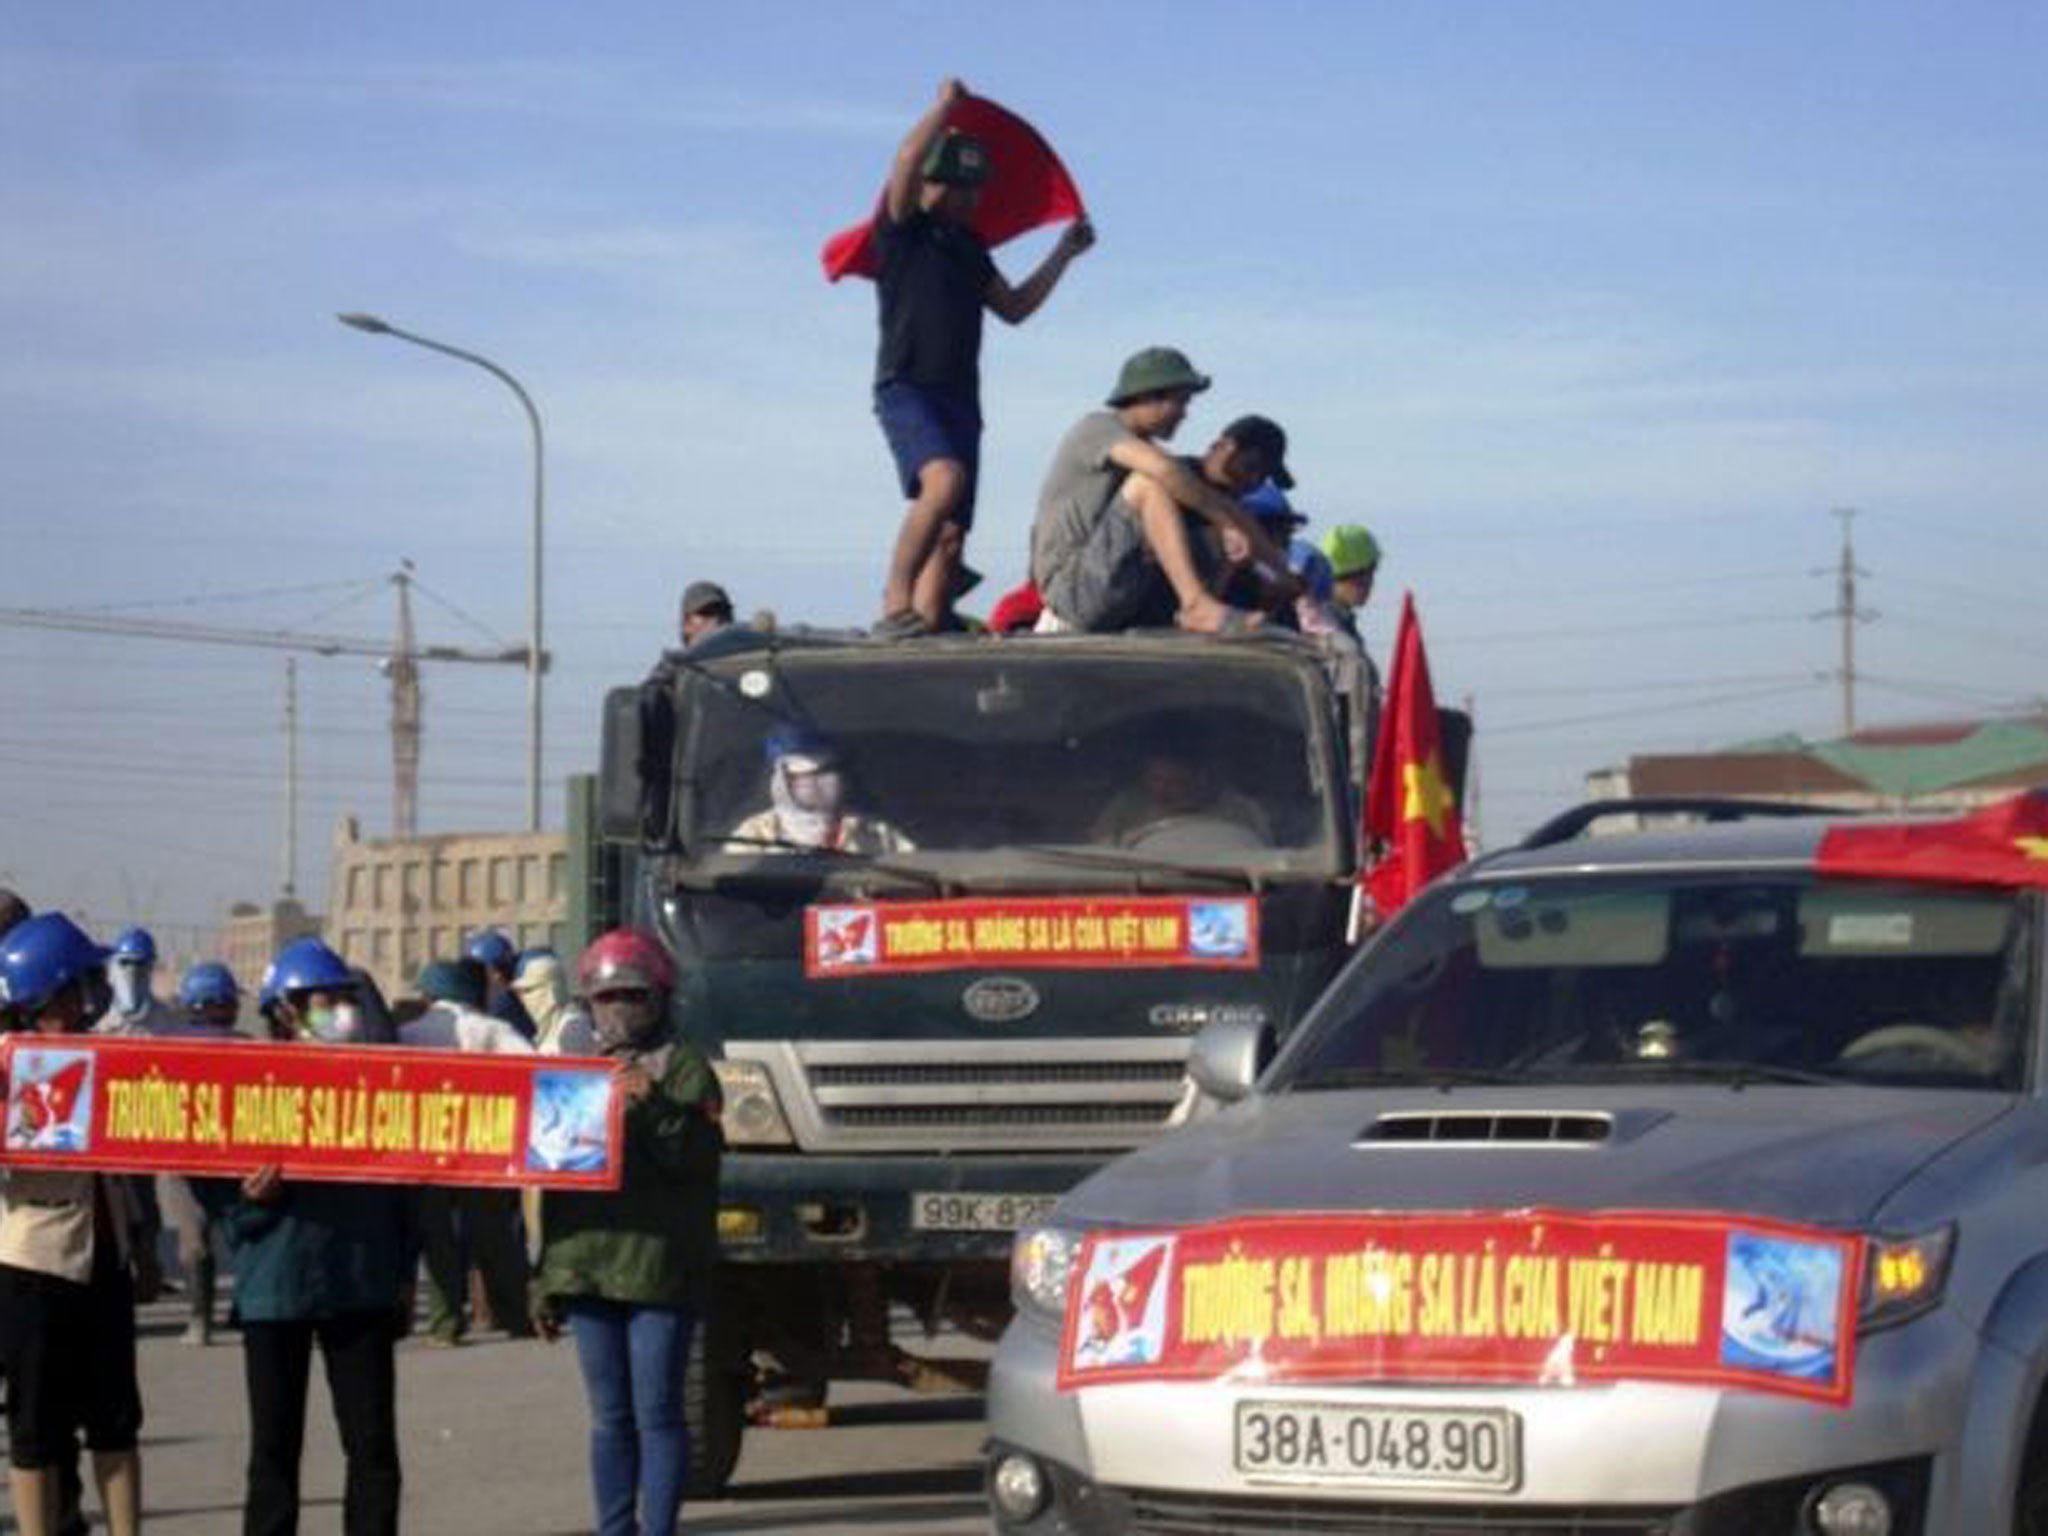 Workers near Formosa factory hold banners reading 'Paracel Islands and Spratly Islands belong to Vietnam'